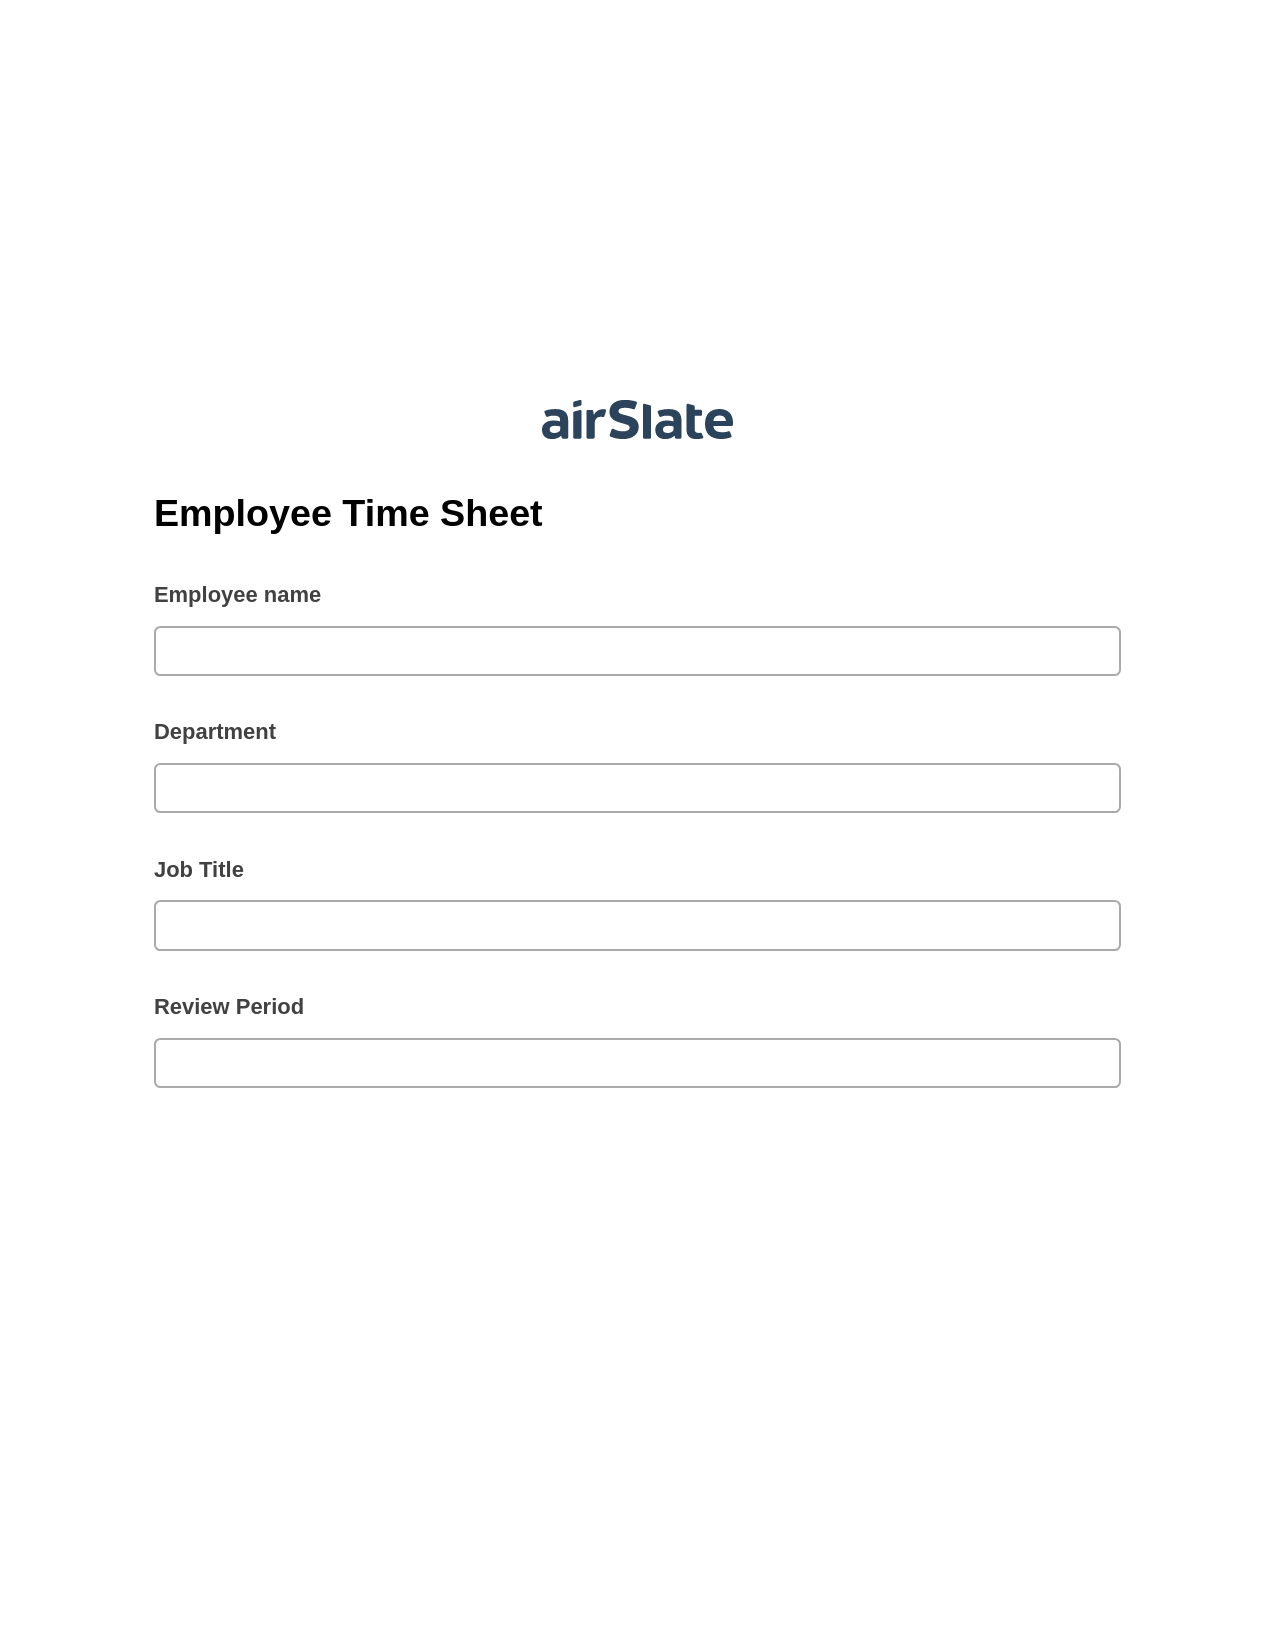 Multirole Employee Time Sheet Pre-fill from another Slate Bot, Create Salesforce Records Bot, Archive to SharePoint Folder Bot